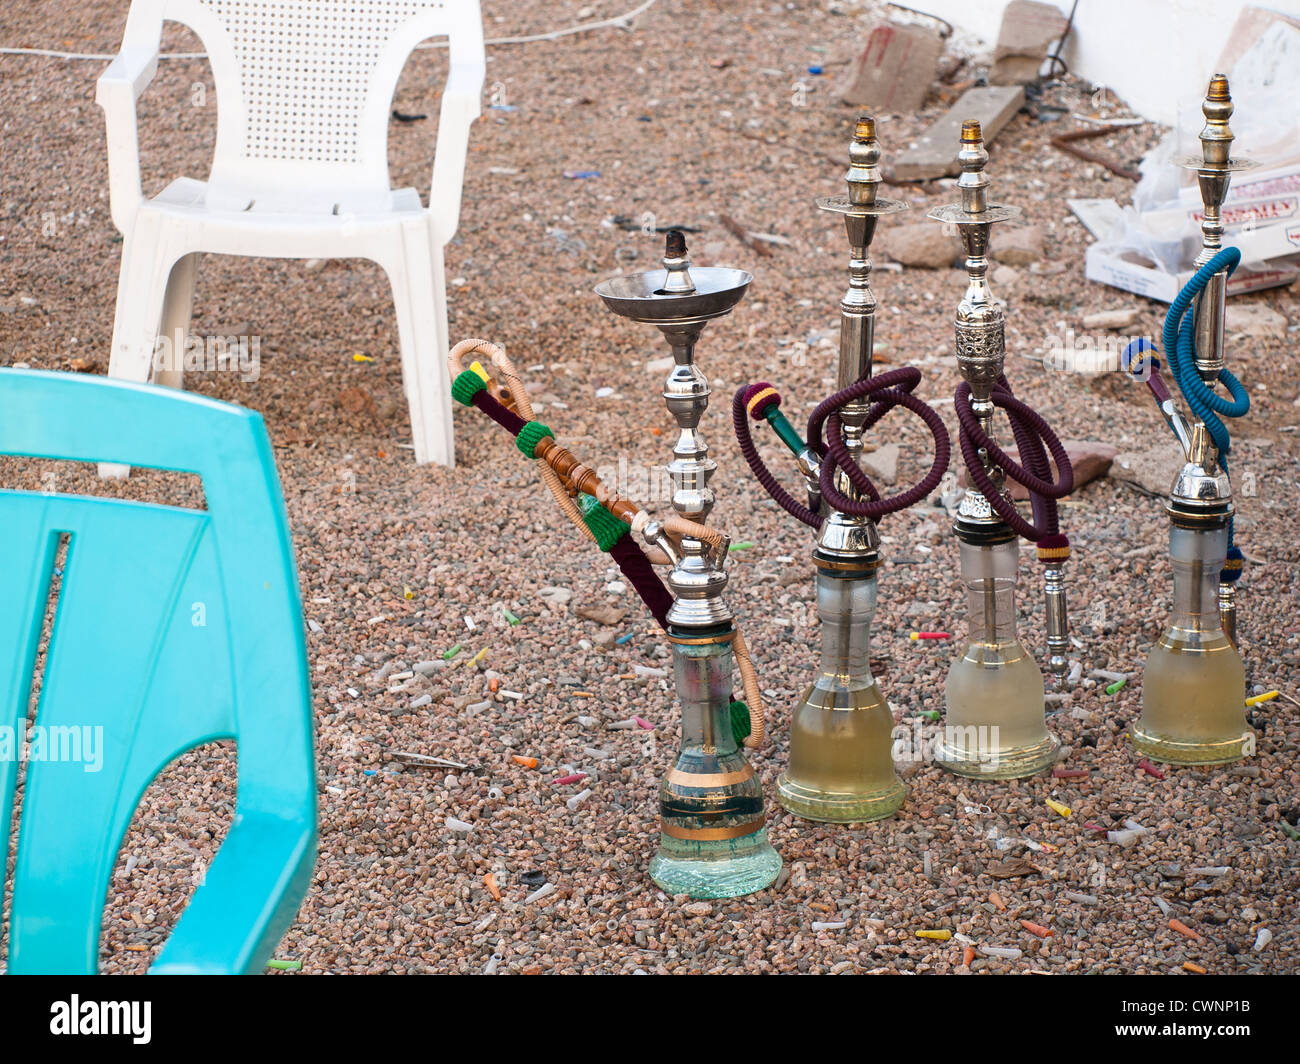 Waterpipe or narghile ready for use in a café in Aqaba Jordan Stock Photo